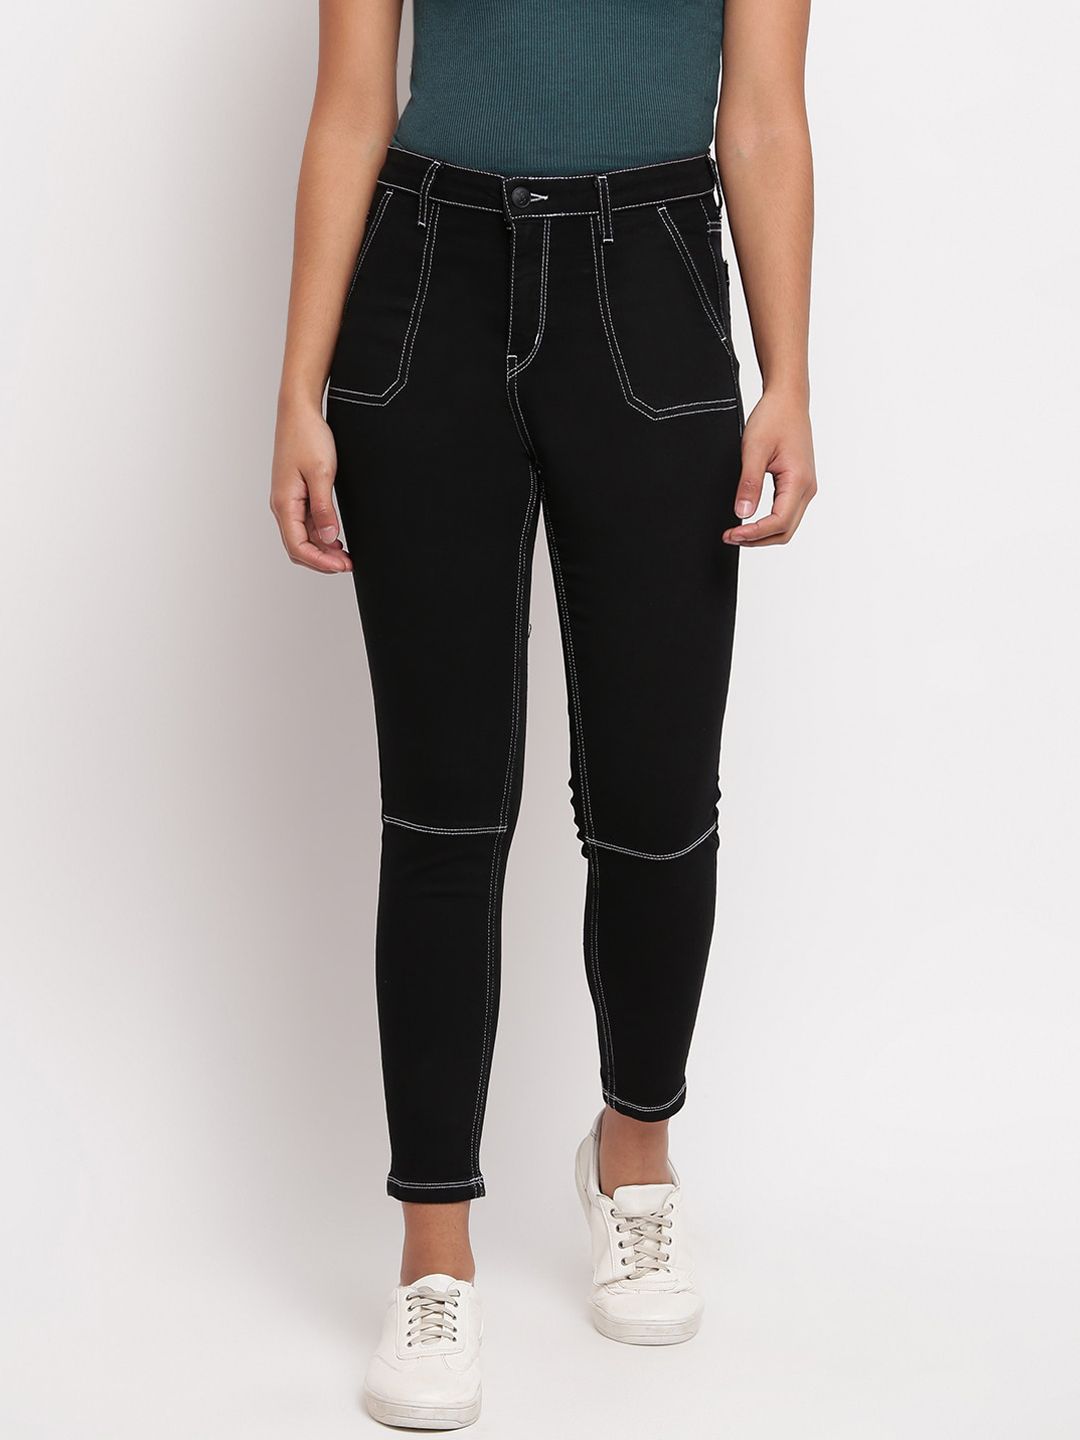 TALES & STORIES Women Black Skinny Fit Jeans Price in India